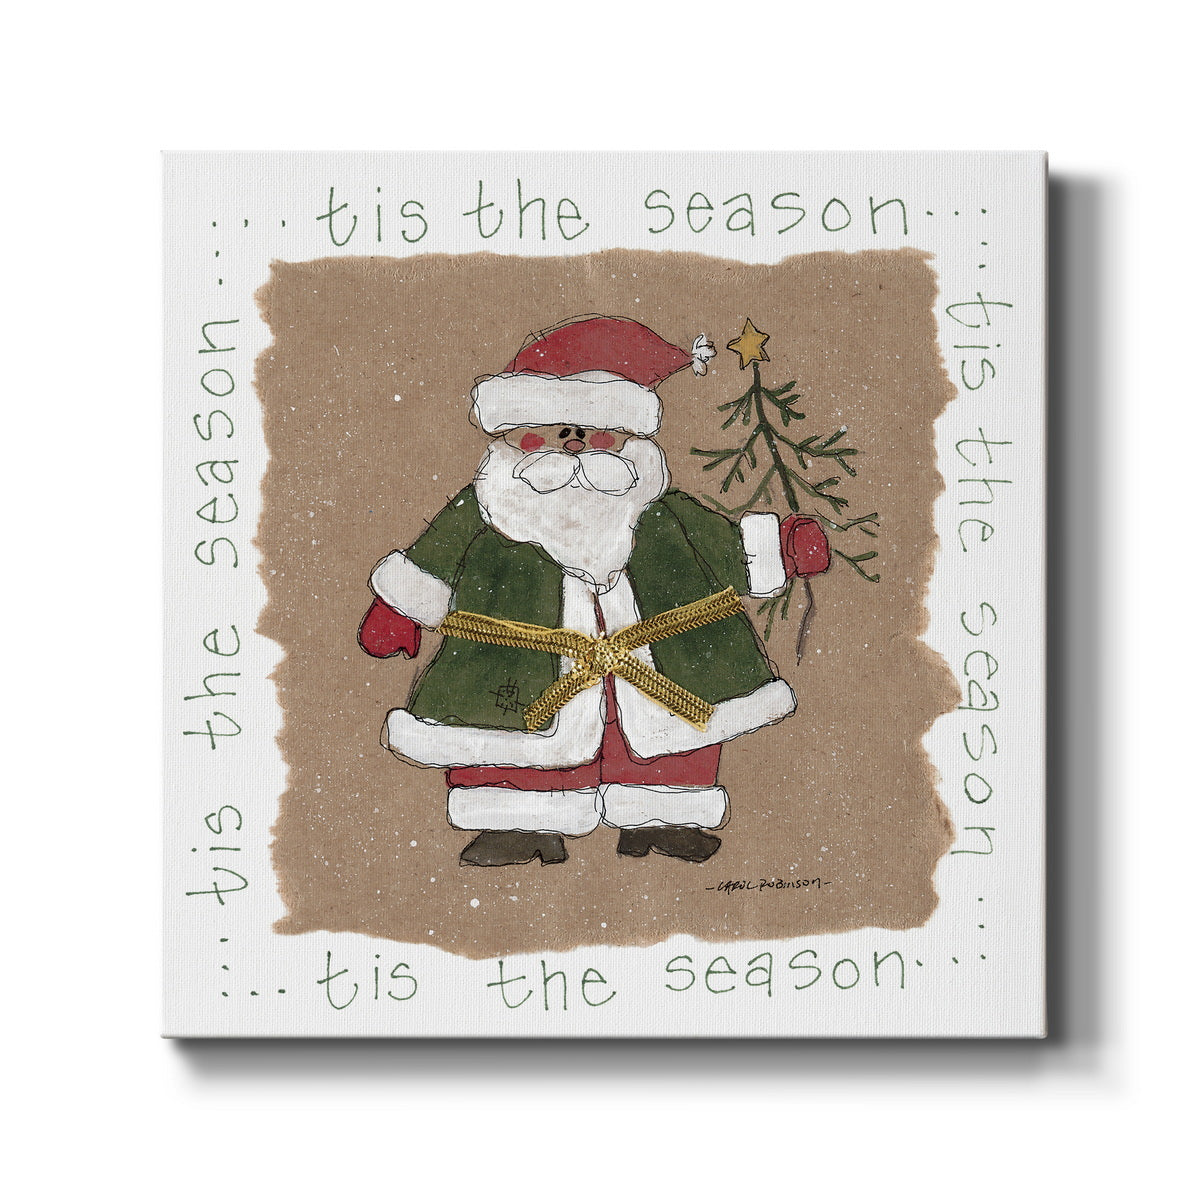 Santa - Premium Gallery Wrapped Canvas  - Ready to Hang